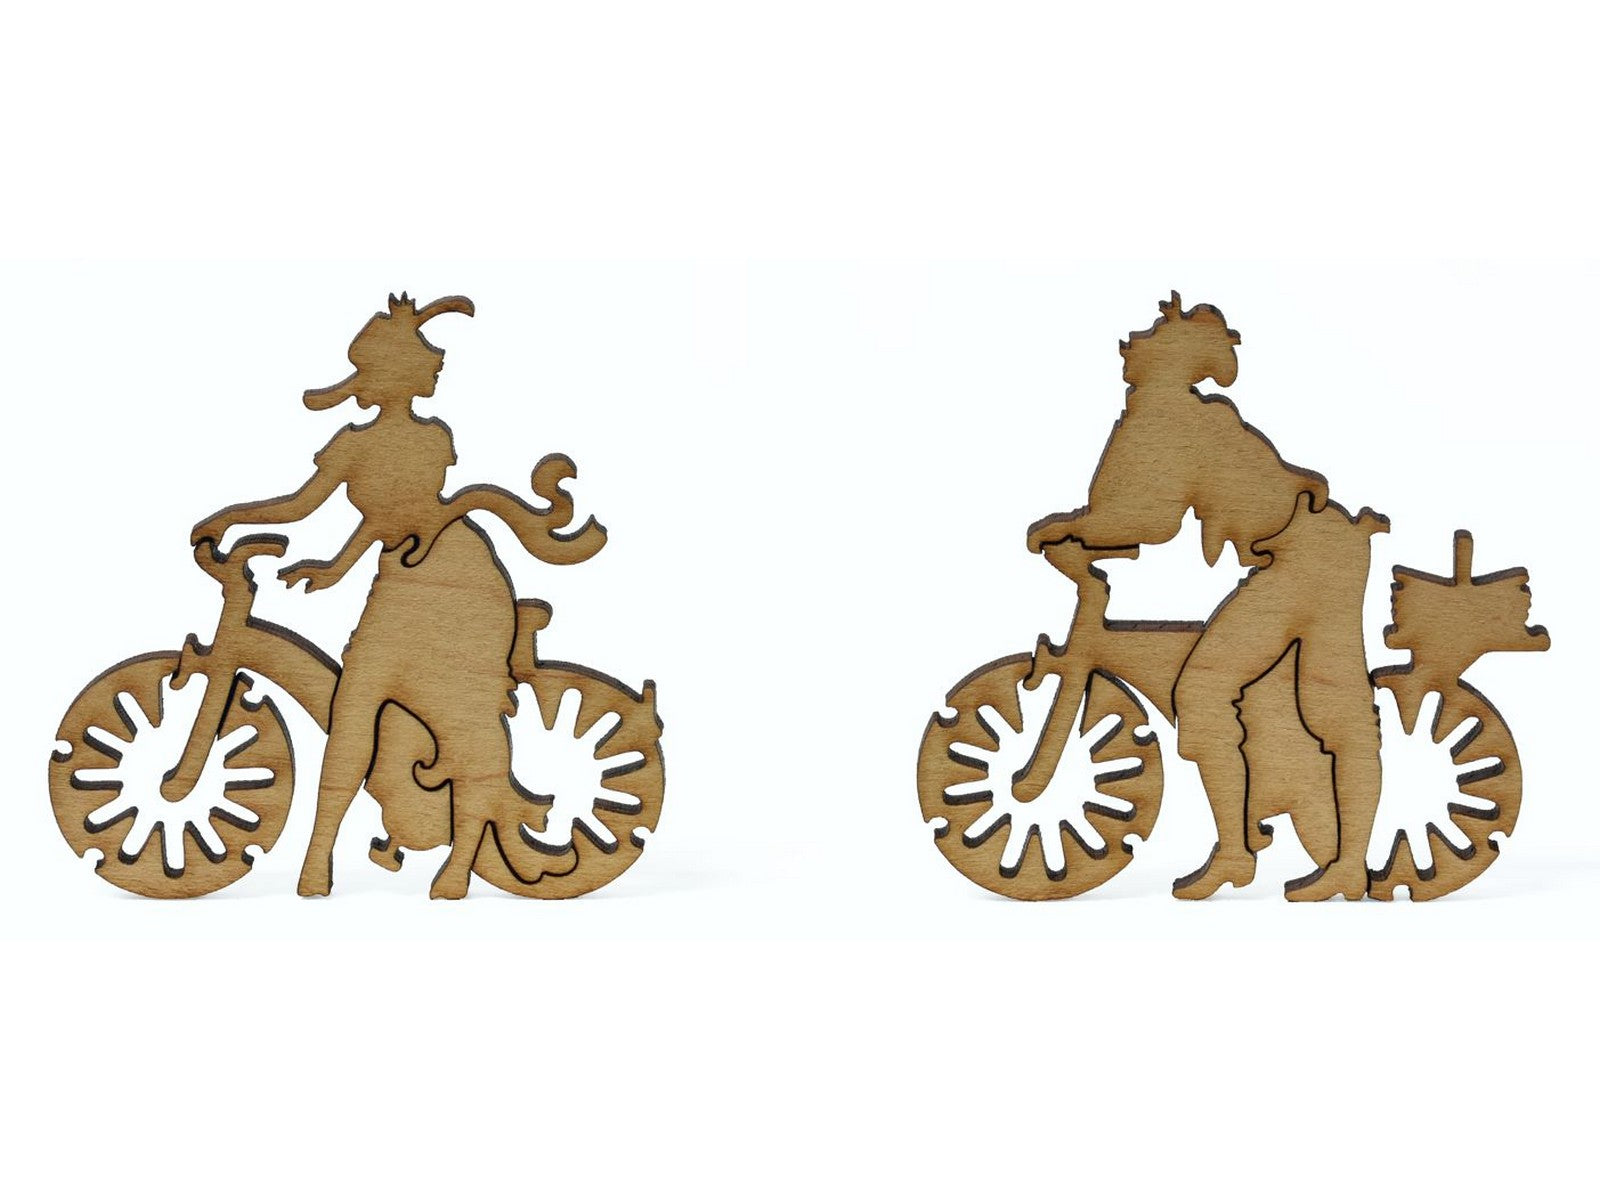 A closeup of pieces showing two people riding bicycles.